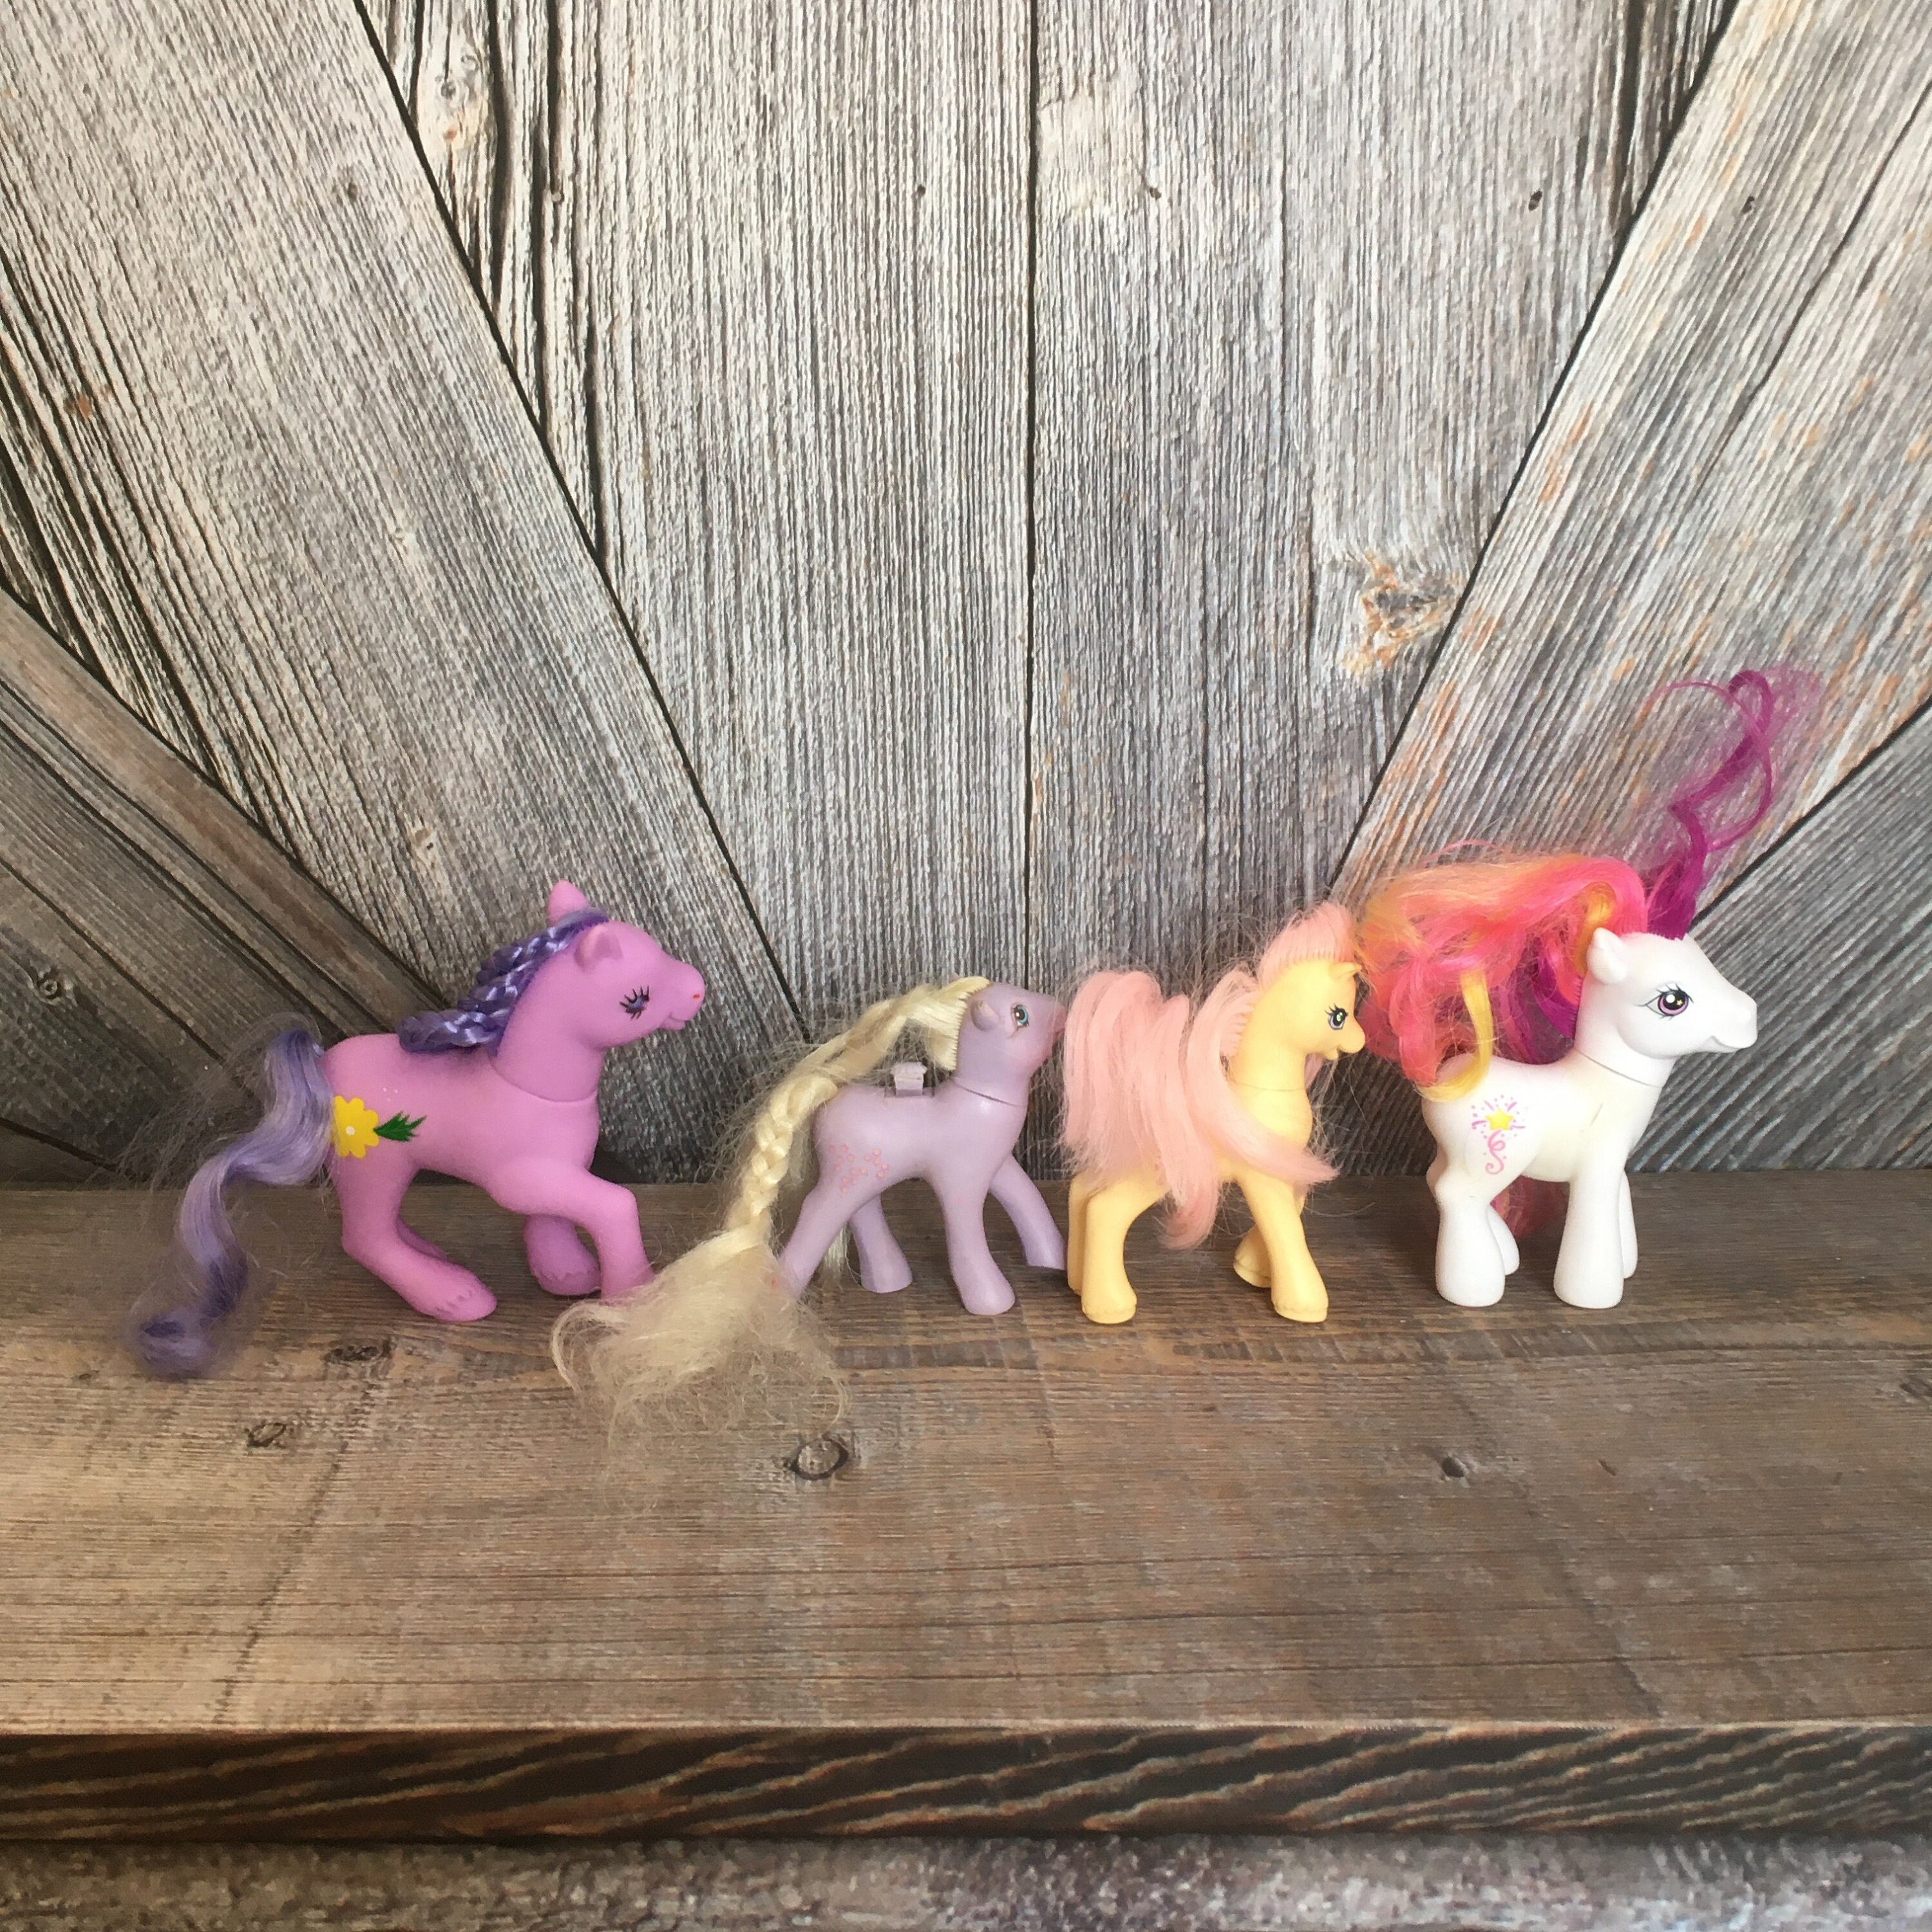 My Little Pony Instant Collection 4 My Little Ponies Unicorn Toys Pink  Rainbow Purple Blue Hair Horse Toy Vintage Pony Toys 80s Toys 